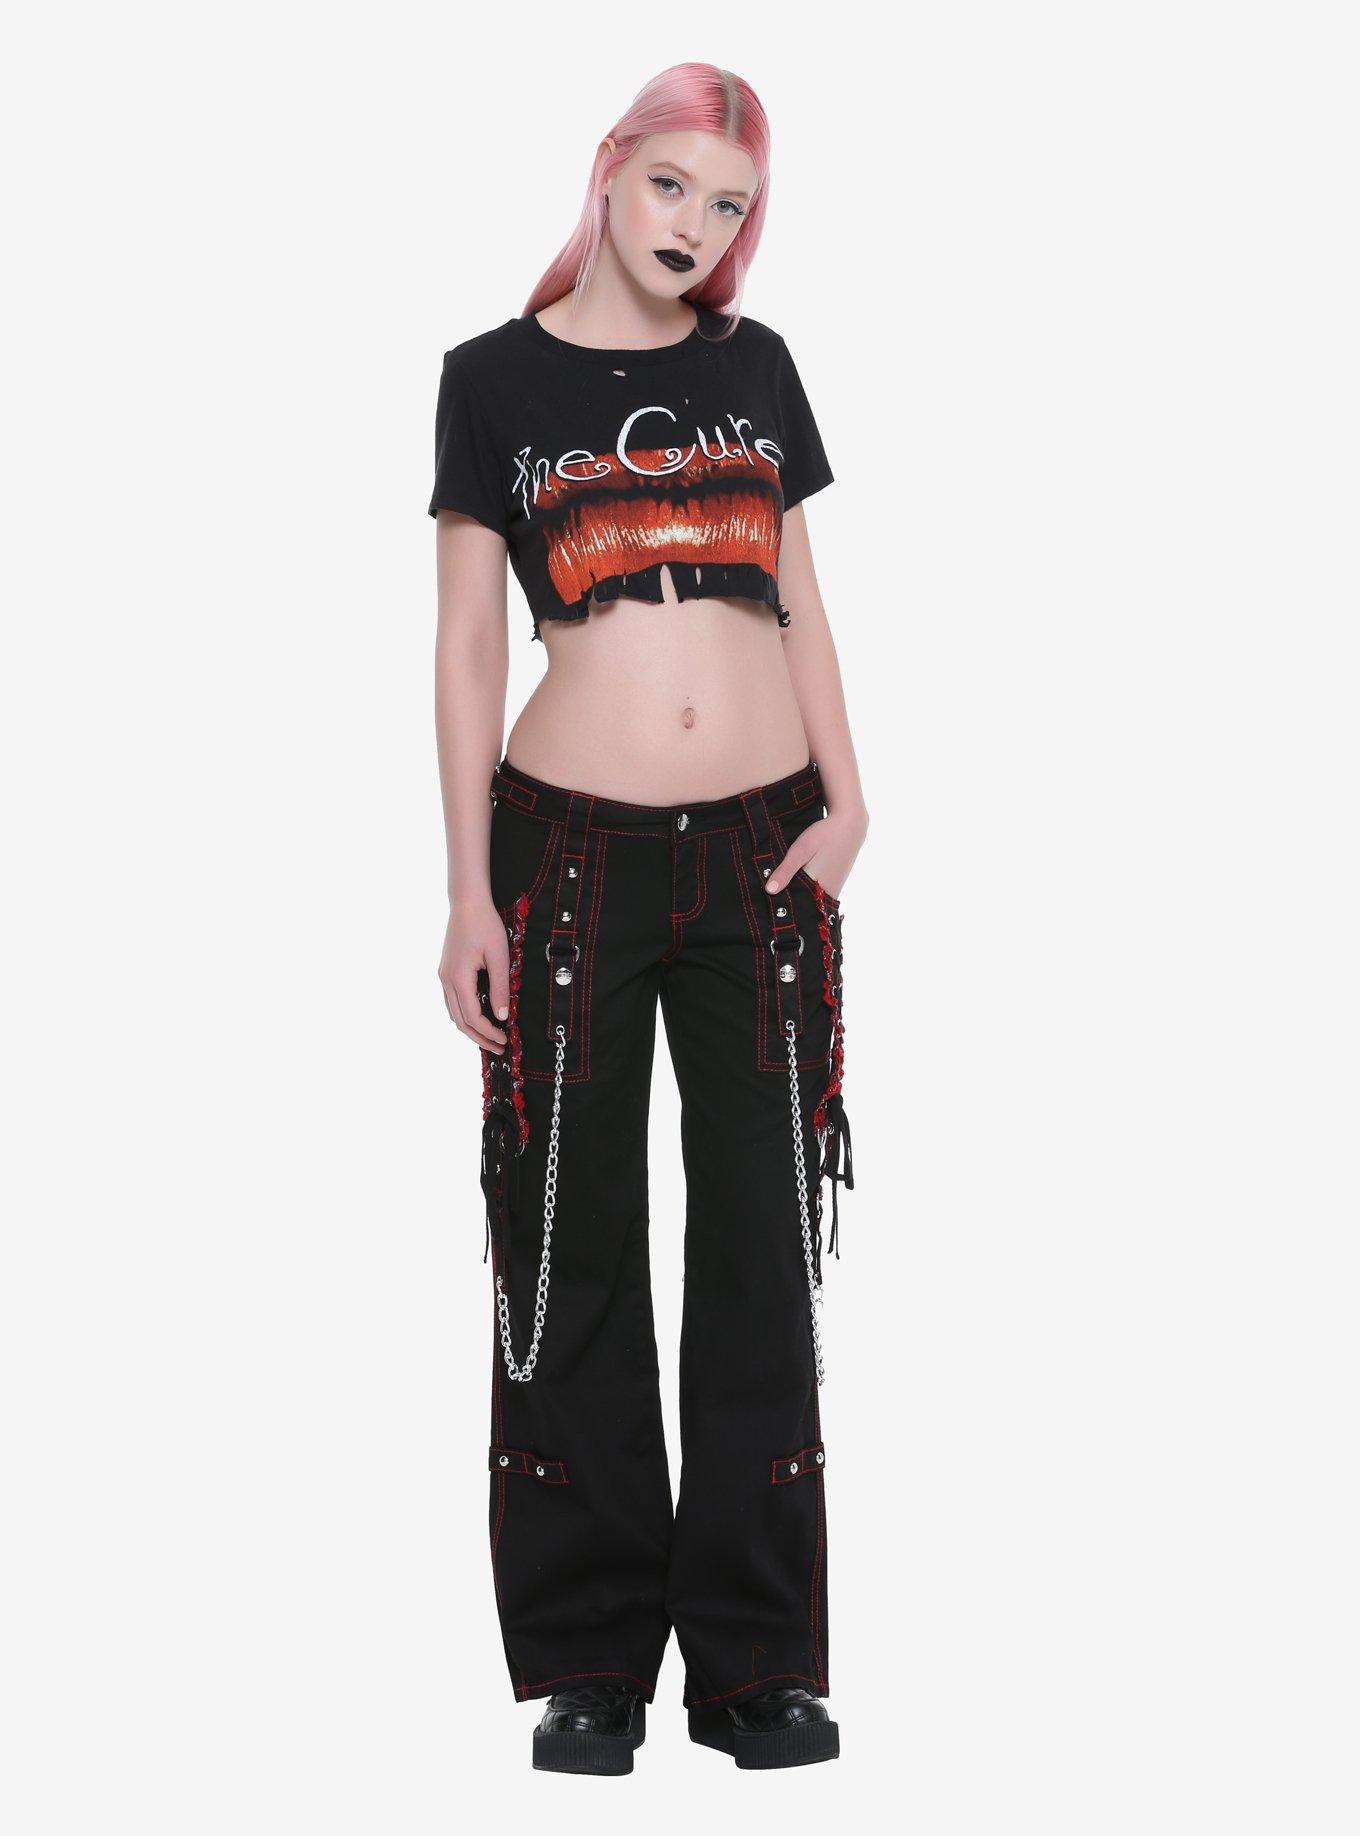 Tripp Black And Red Dark Street Pants, Hot Topic ($60) ❤ liked on Polyvore  featuring jeans, pants, hot topic…